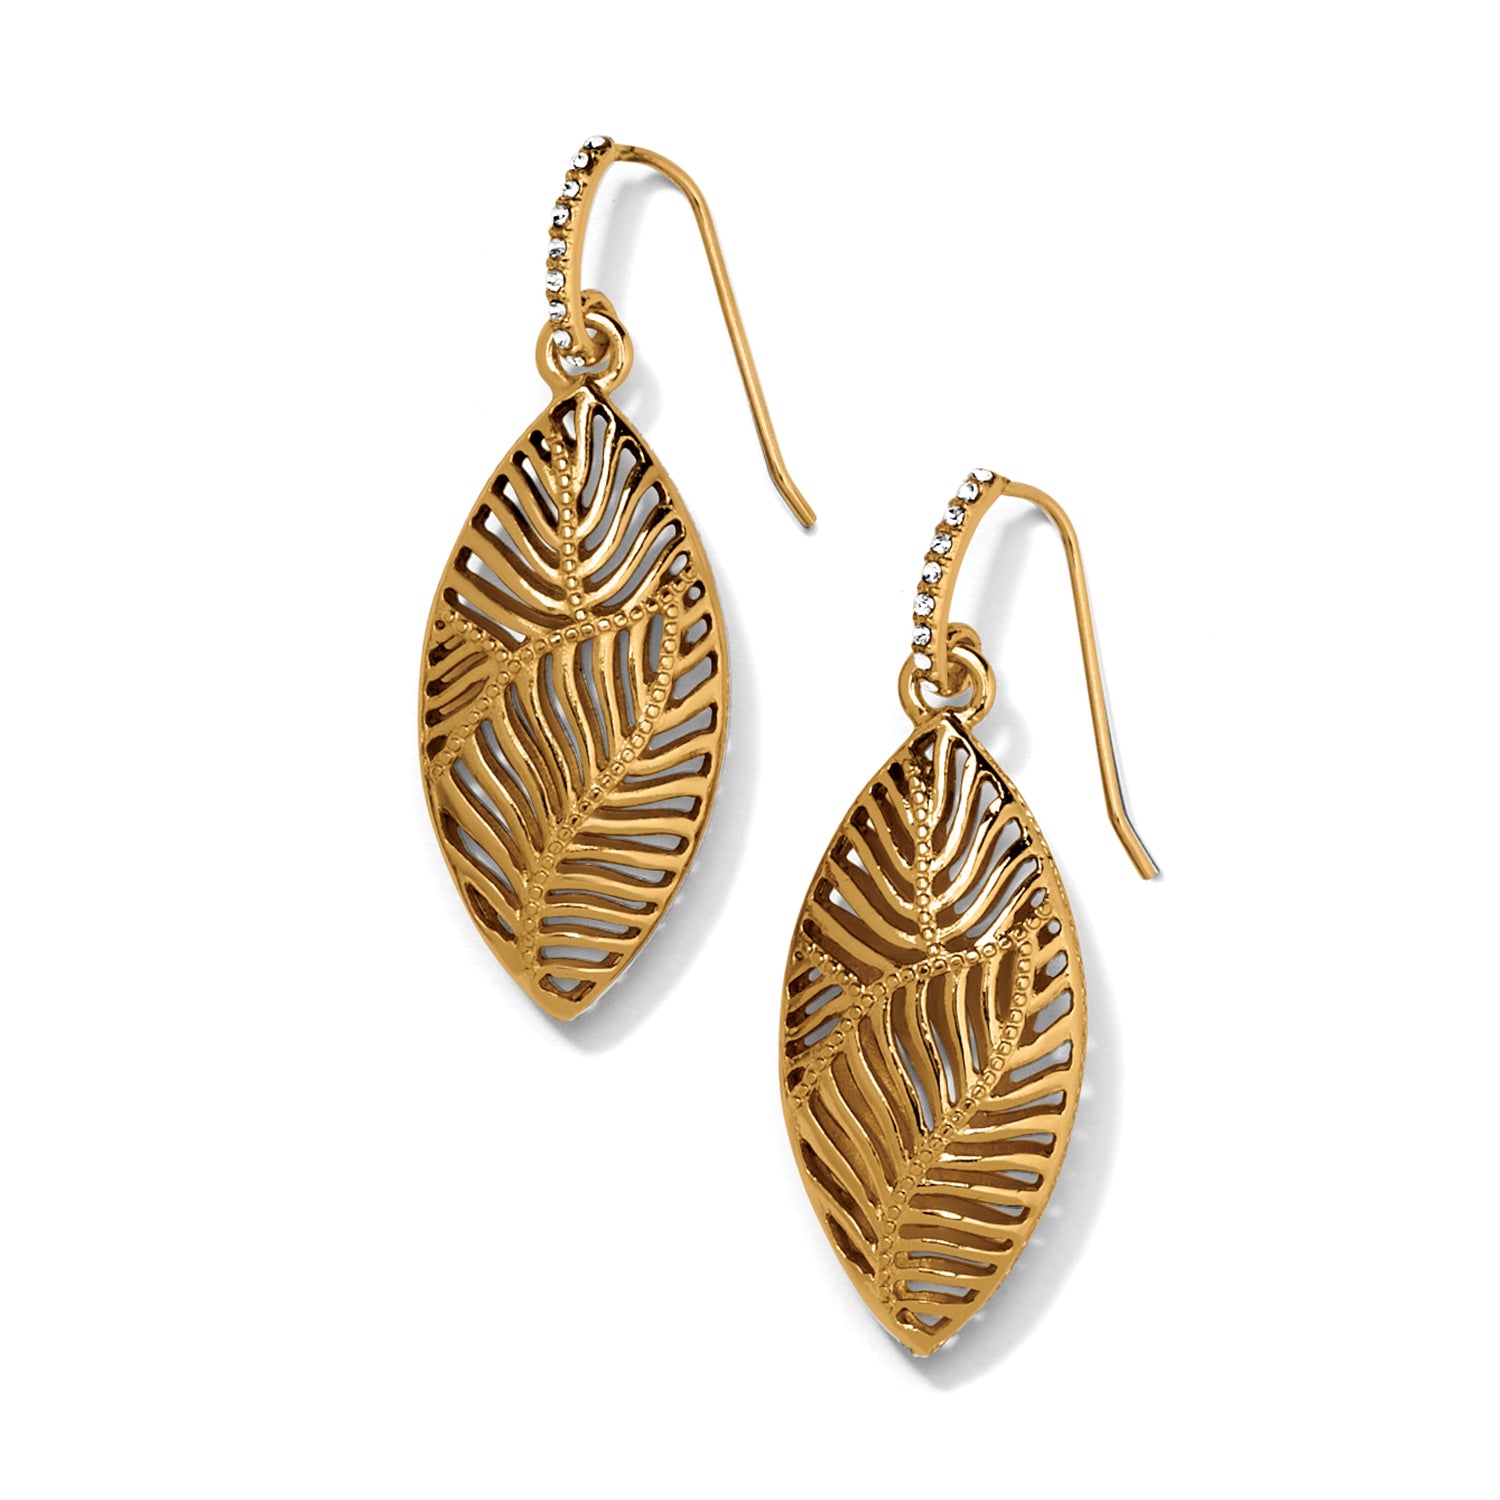 Palmetto French Wire Earrings - Image 1 - Brighton